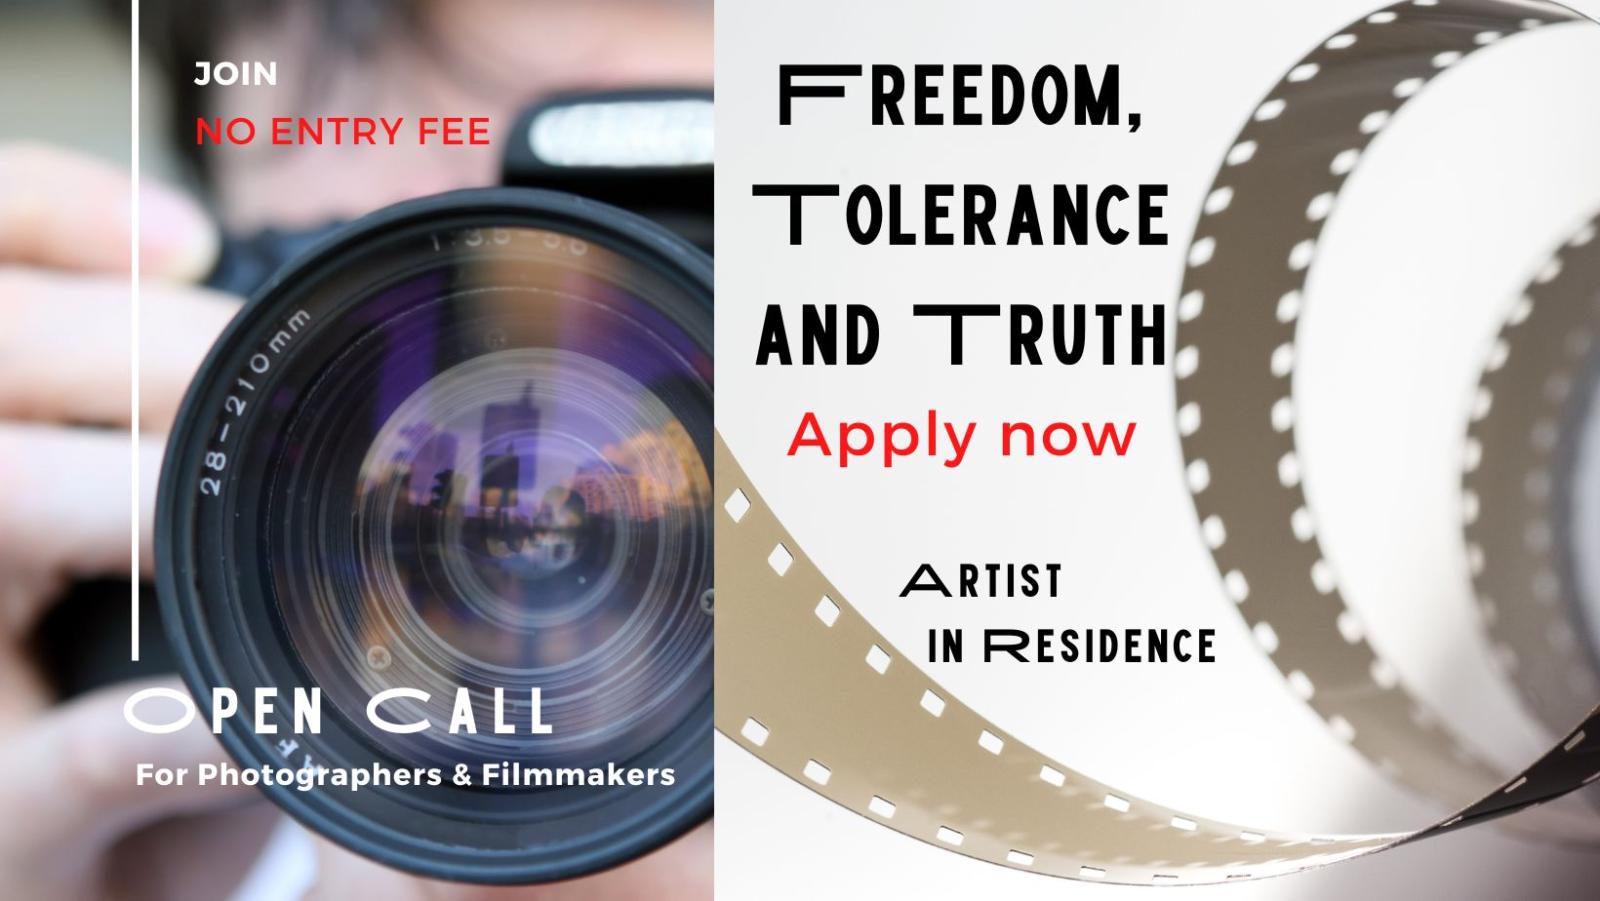 Thumbnail of Freedom, Tolerance and Truth. Open Call for International Photographers & Filmmakers: Artist in Residence supported by Michael Nguyen, Editor-in-chief at Tagree